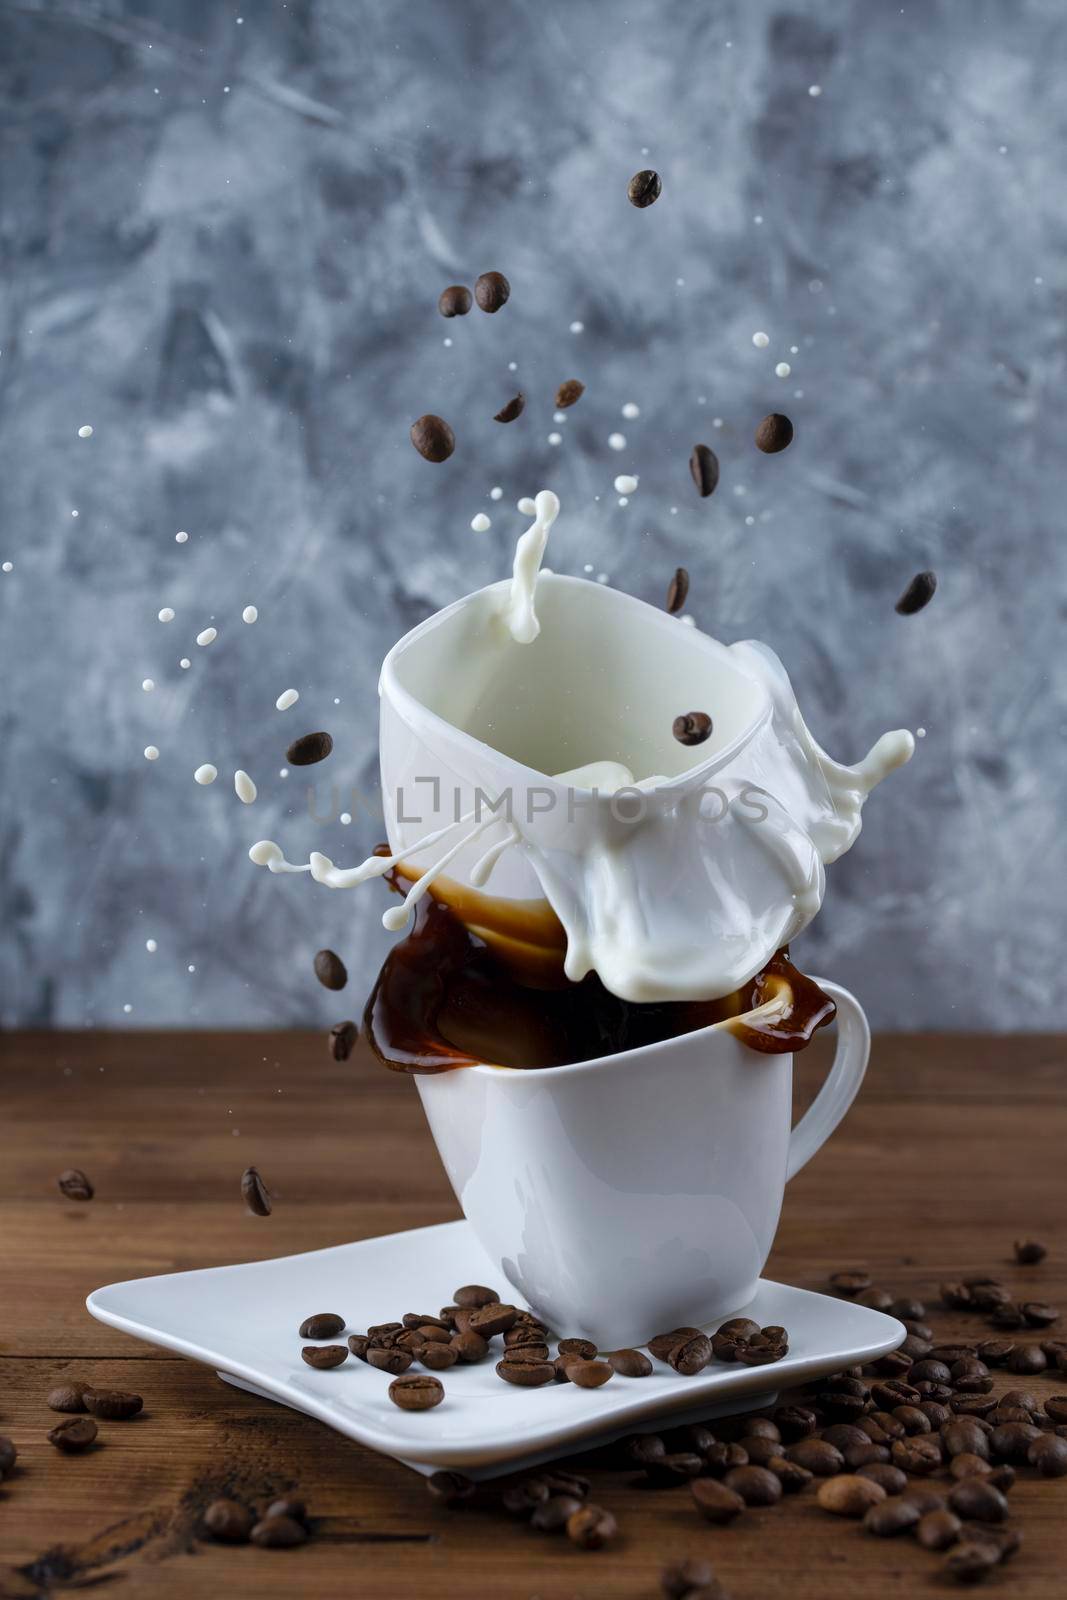 splash and splatter from a piece of sugar in a mug with coffee and mug with milk on a wooden background by sashokddt